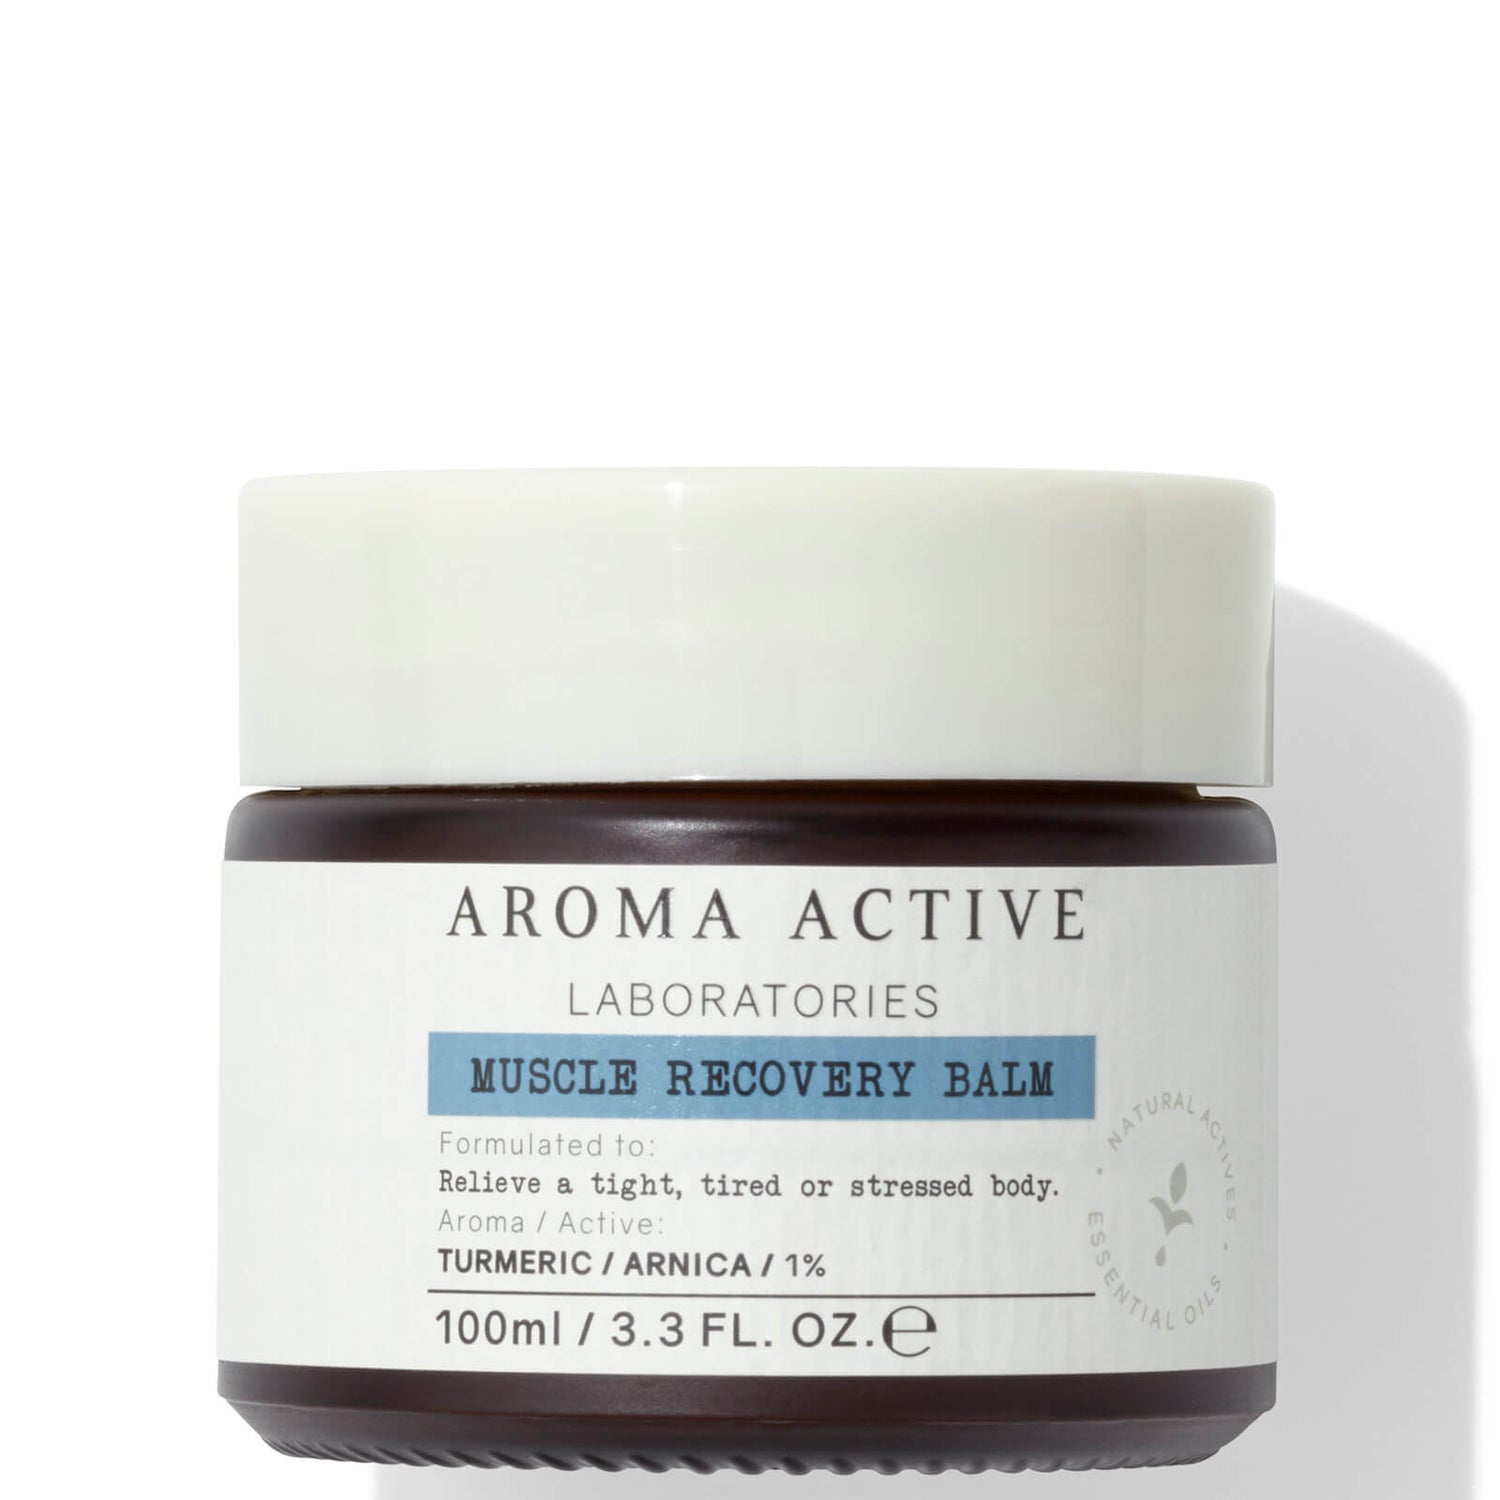 Aroma Active Muscle Recovery Balm 100ml